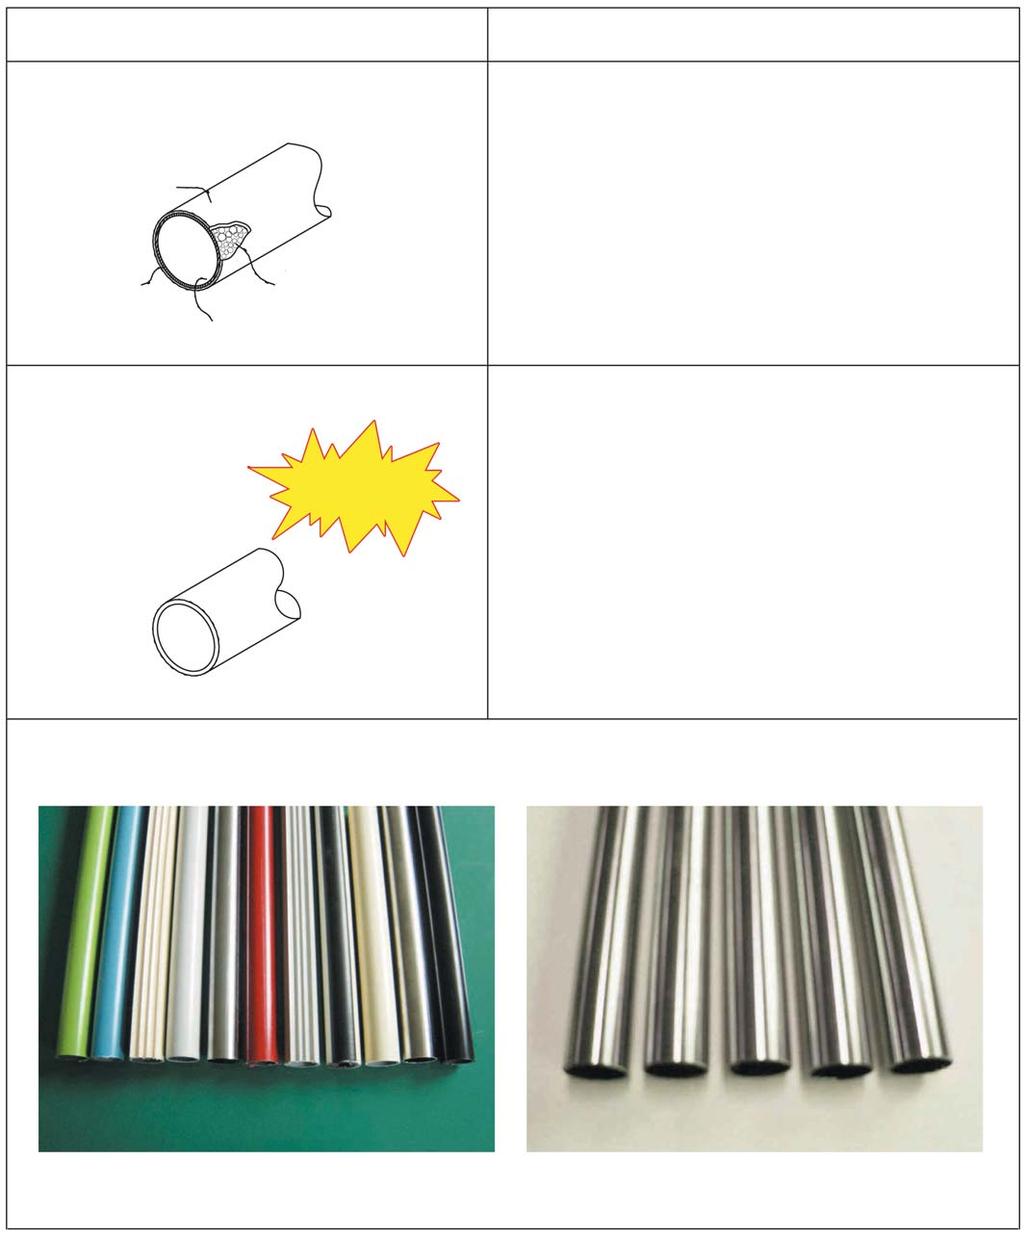 SPECIFICATION & COLOUR FOR COATED & STAINLESS STEEL TUBES (1) Coated Tube ABS Resin Steel Tube Tube Structure Rust Inhibitor Stainless Steel Tube Adhesive (To bond plastic resin to steel tube) NEW